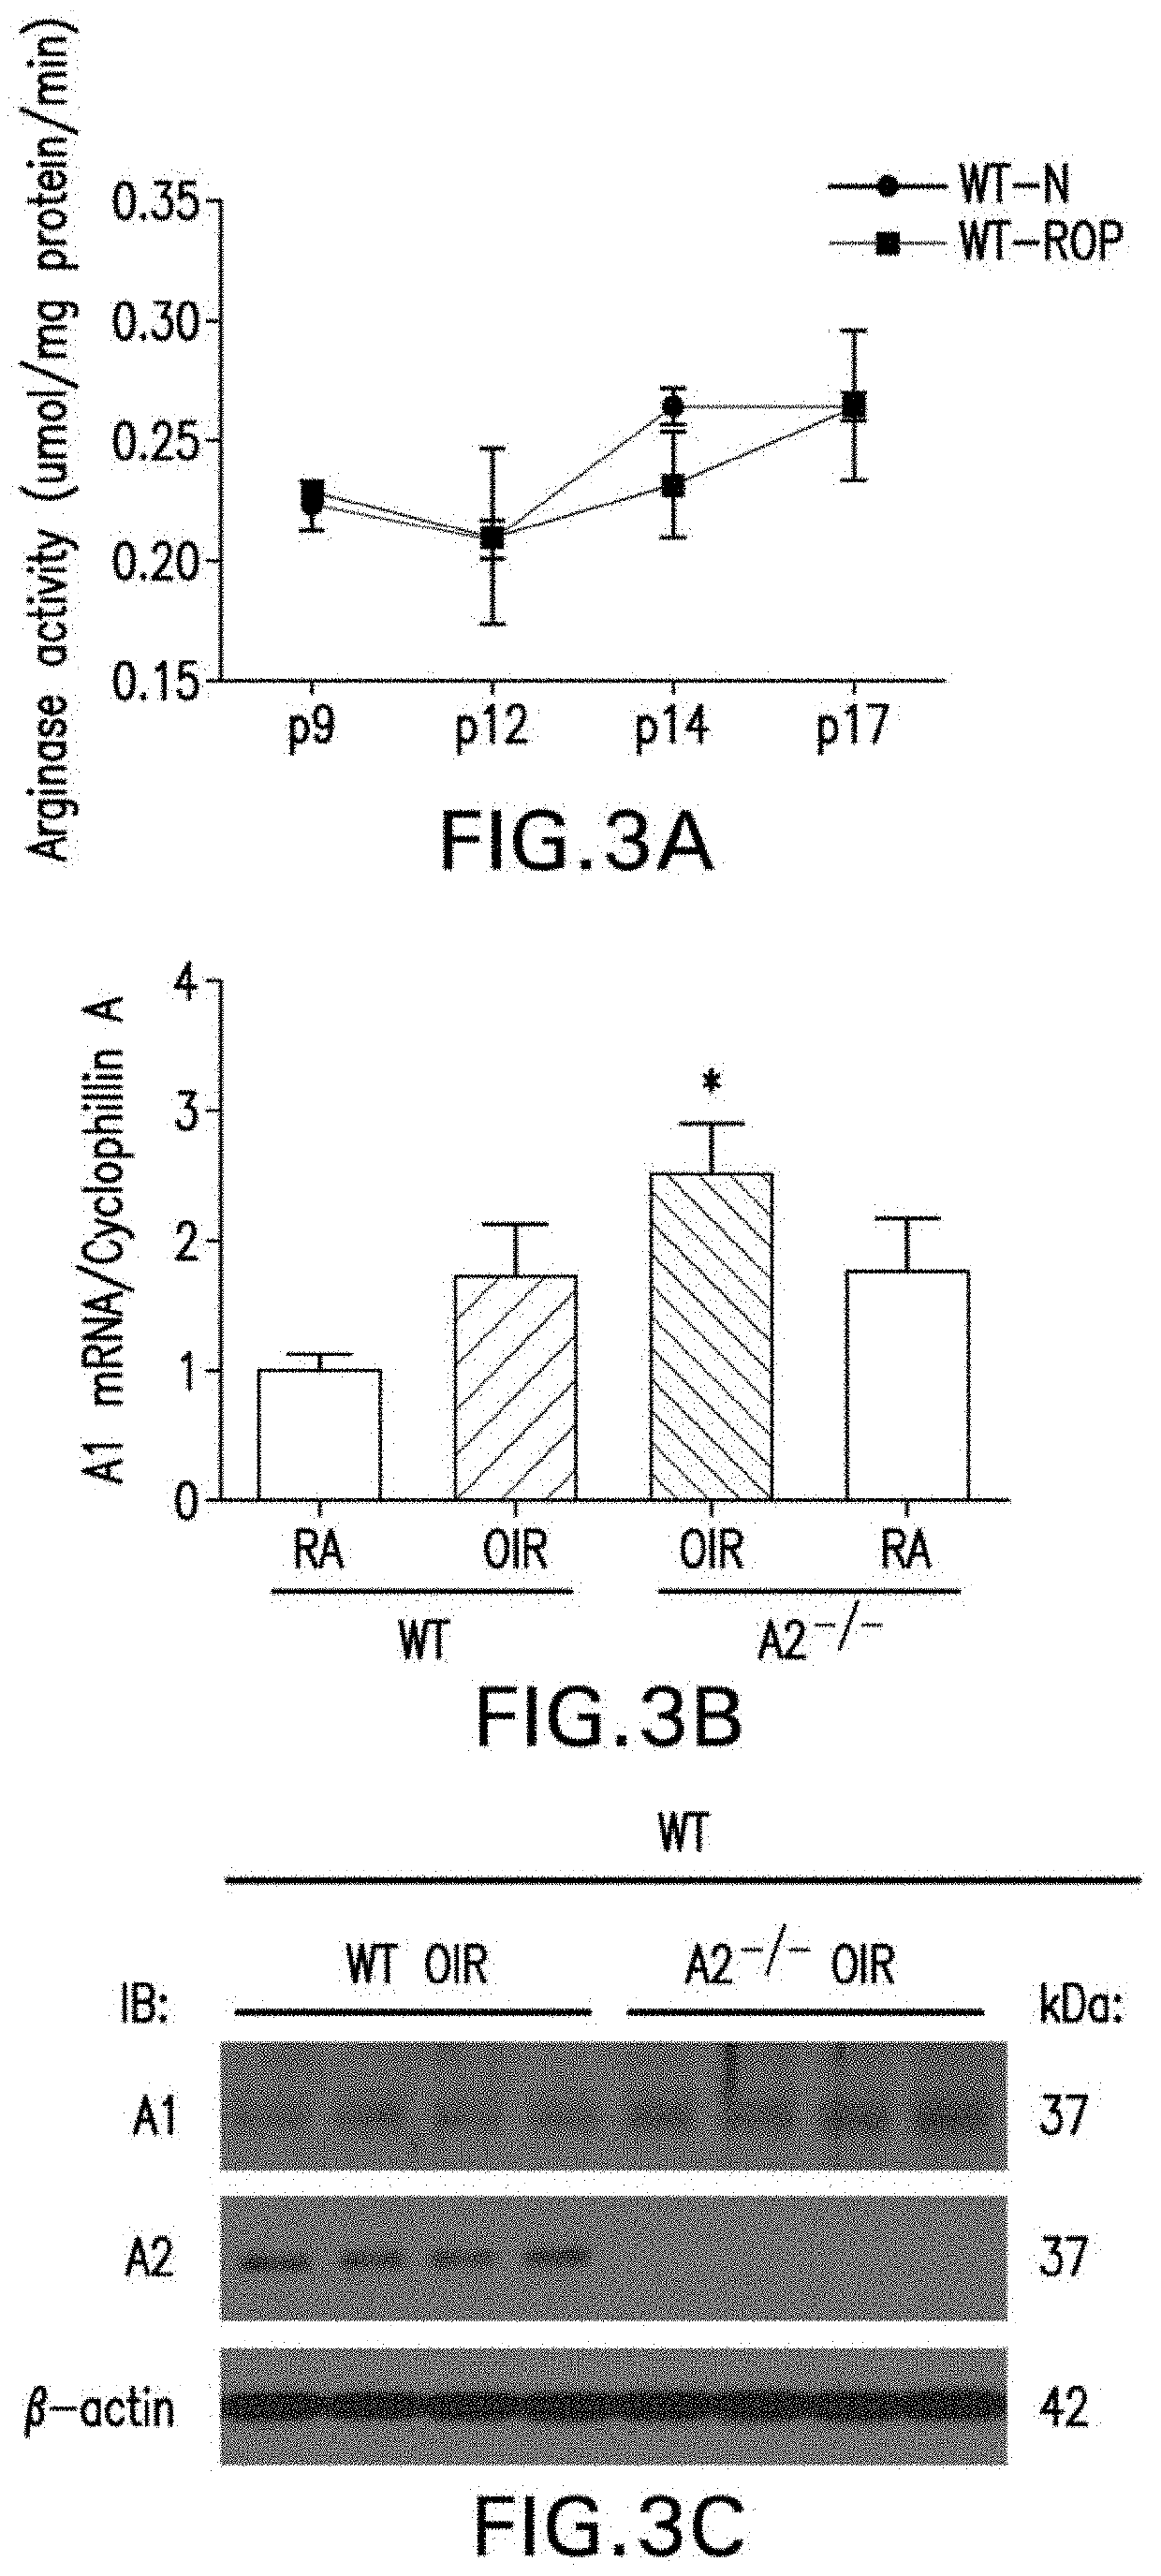 Compositions containing arginase 1 for the treatment of neurovascular and retinal vascular disorders